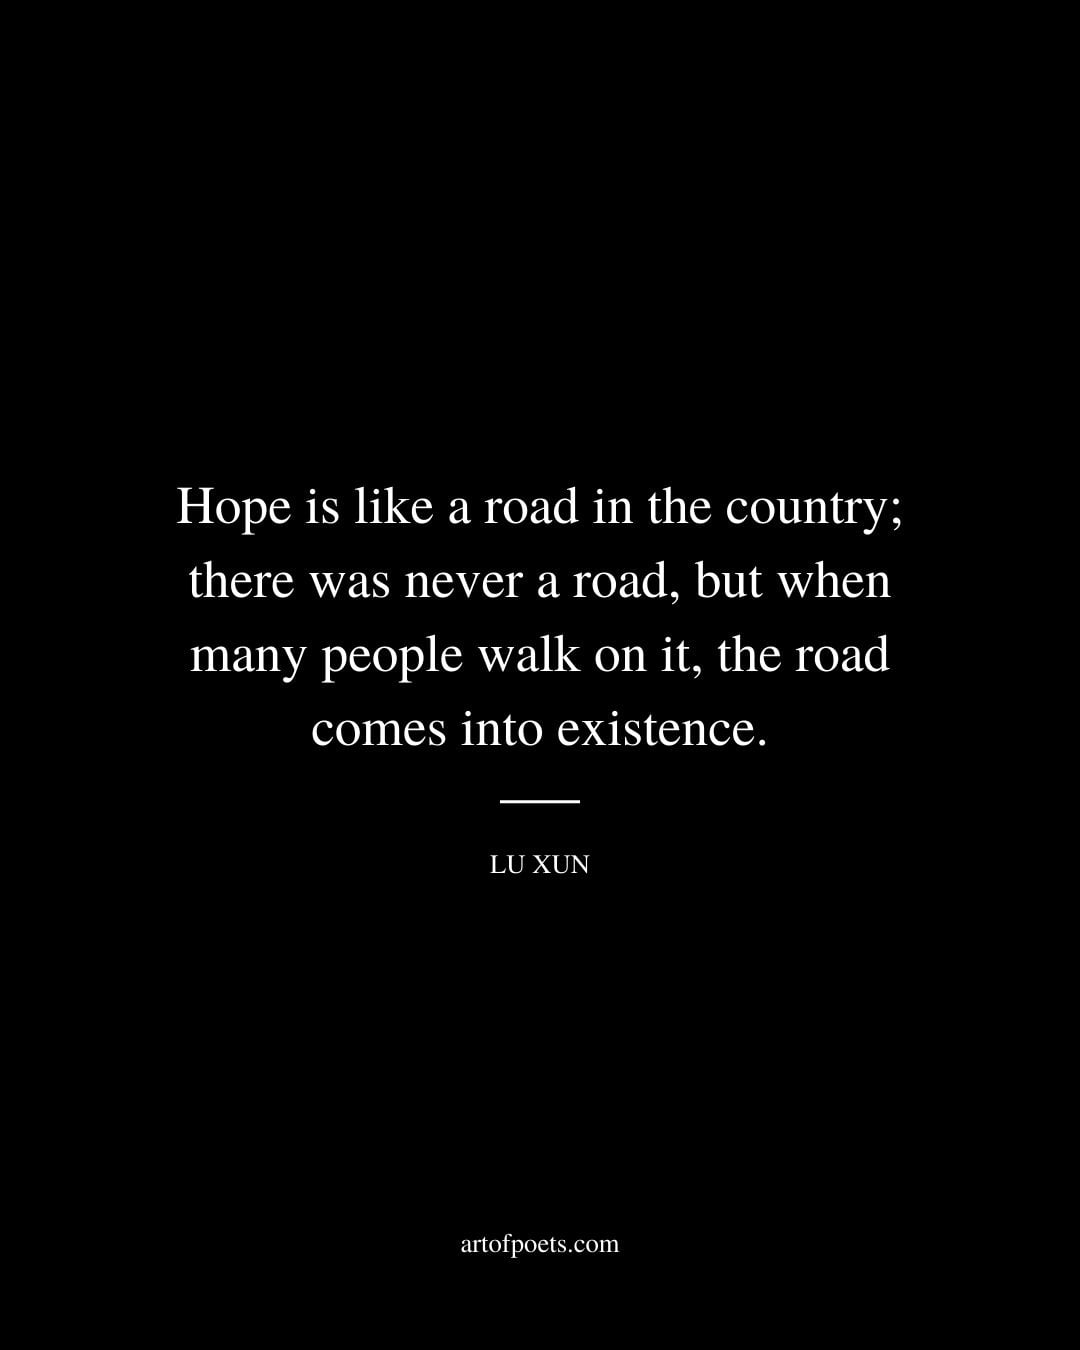 Hope is like a road in the country there was never a road but when many people walk on it the road comes into existence. Lu Xun